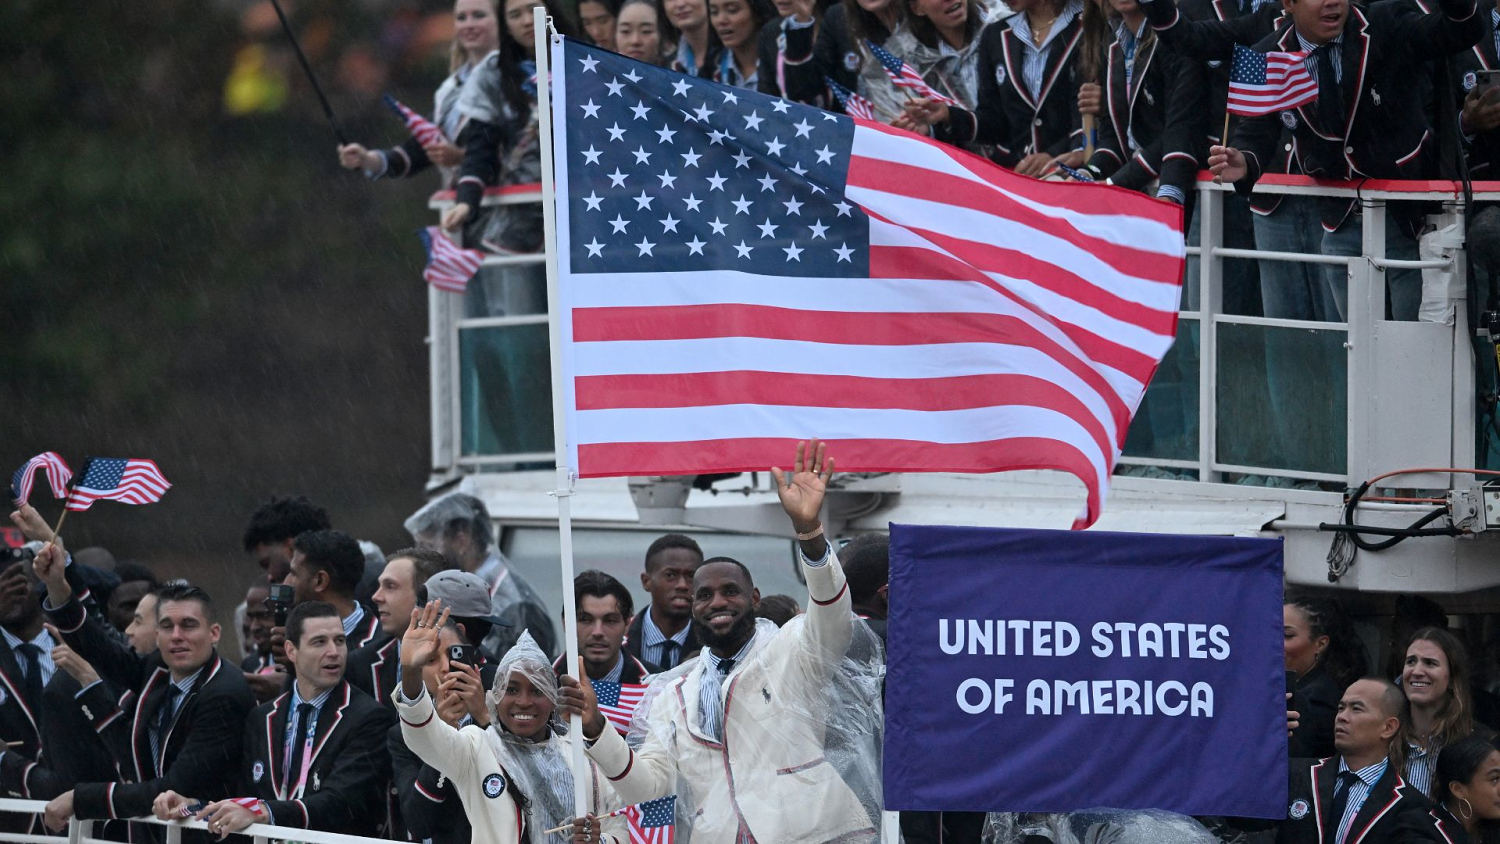 2024 U.S. Olympic team arrives at Opening Ceremony in Paris